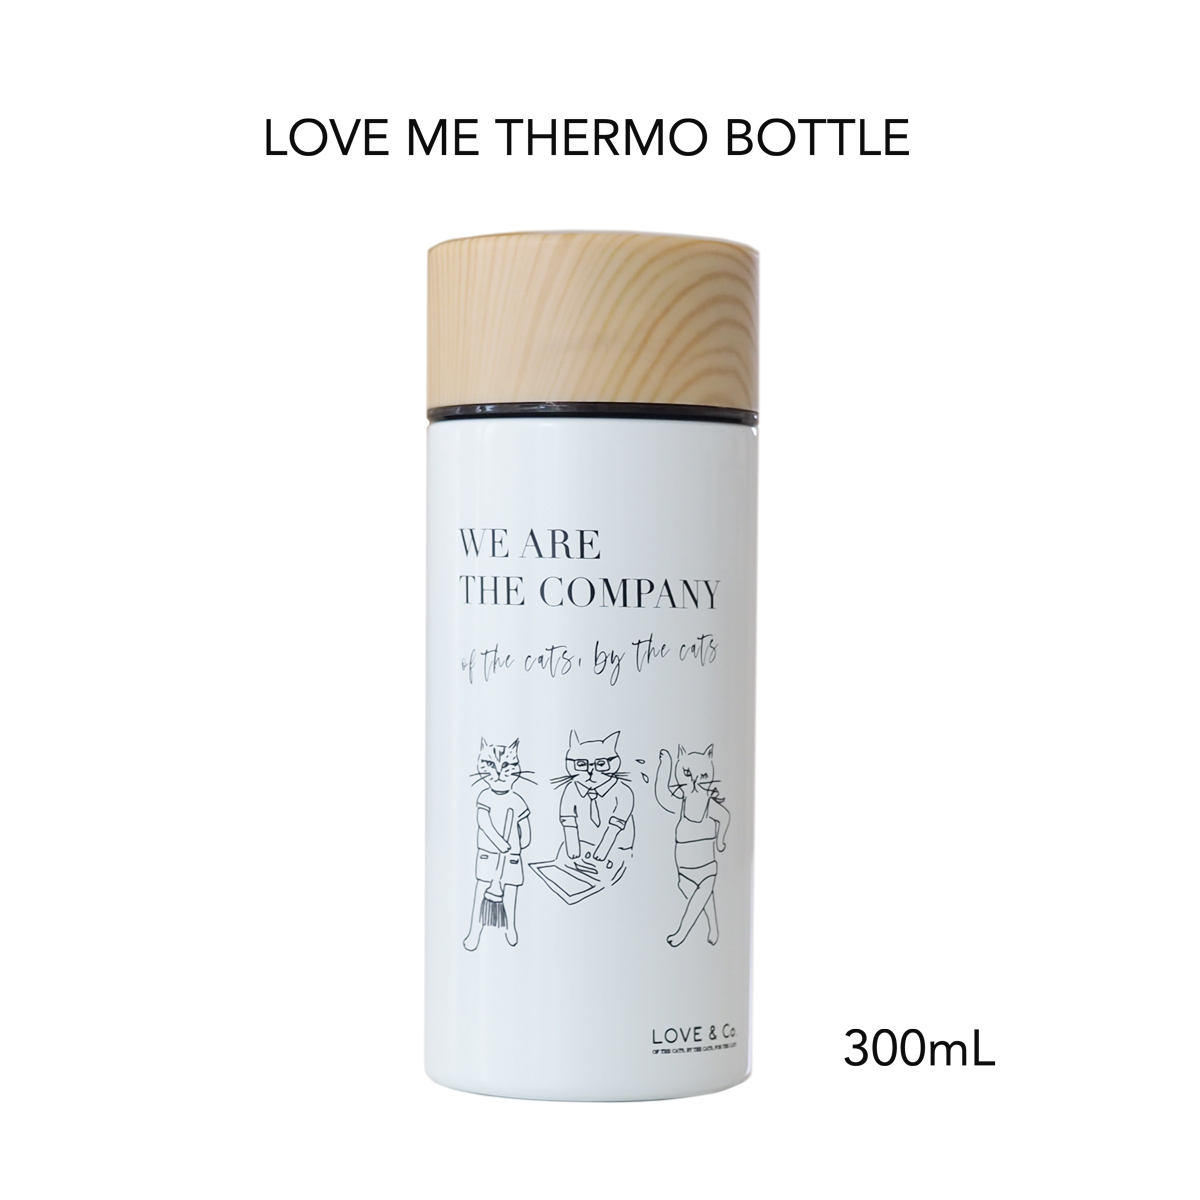 LOVE ME THERMO BOTTLE画像